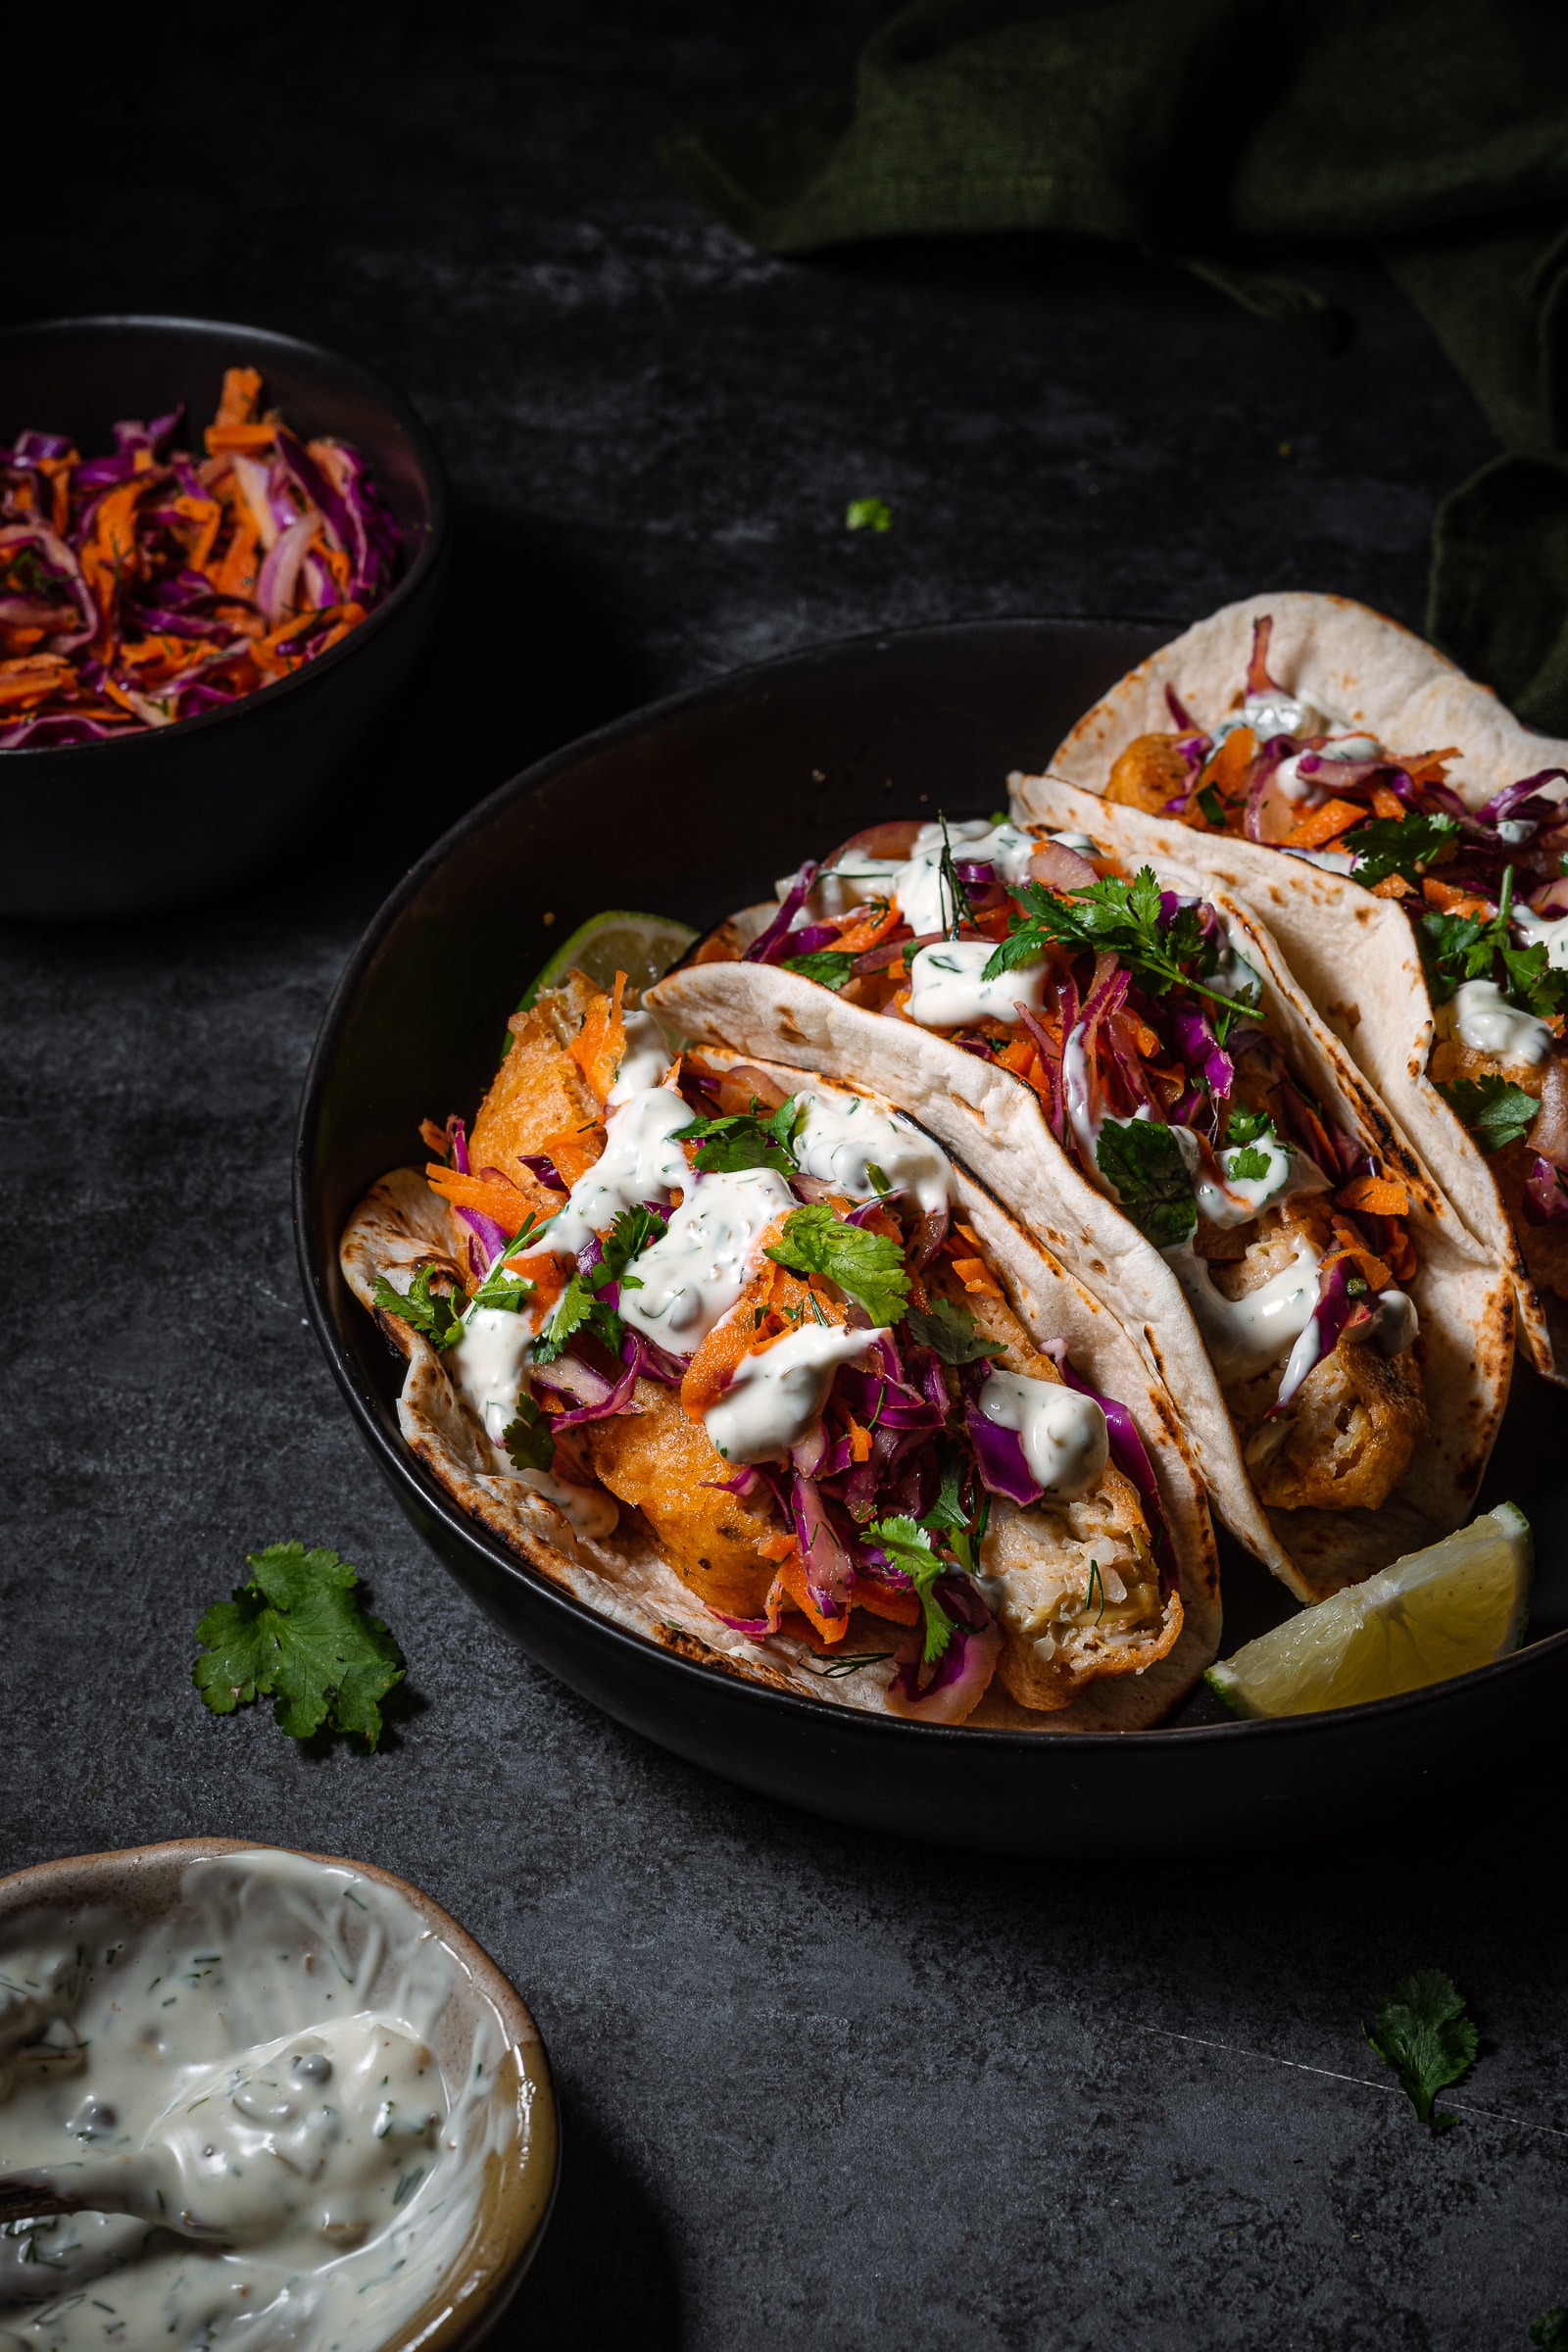 Vegan fish tacos topped with red cabbage slaw and garnished with cilantro.